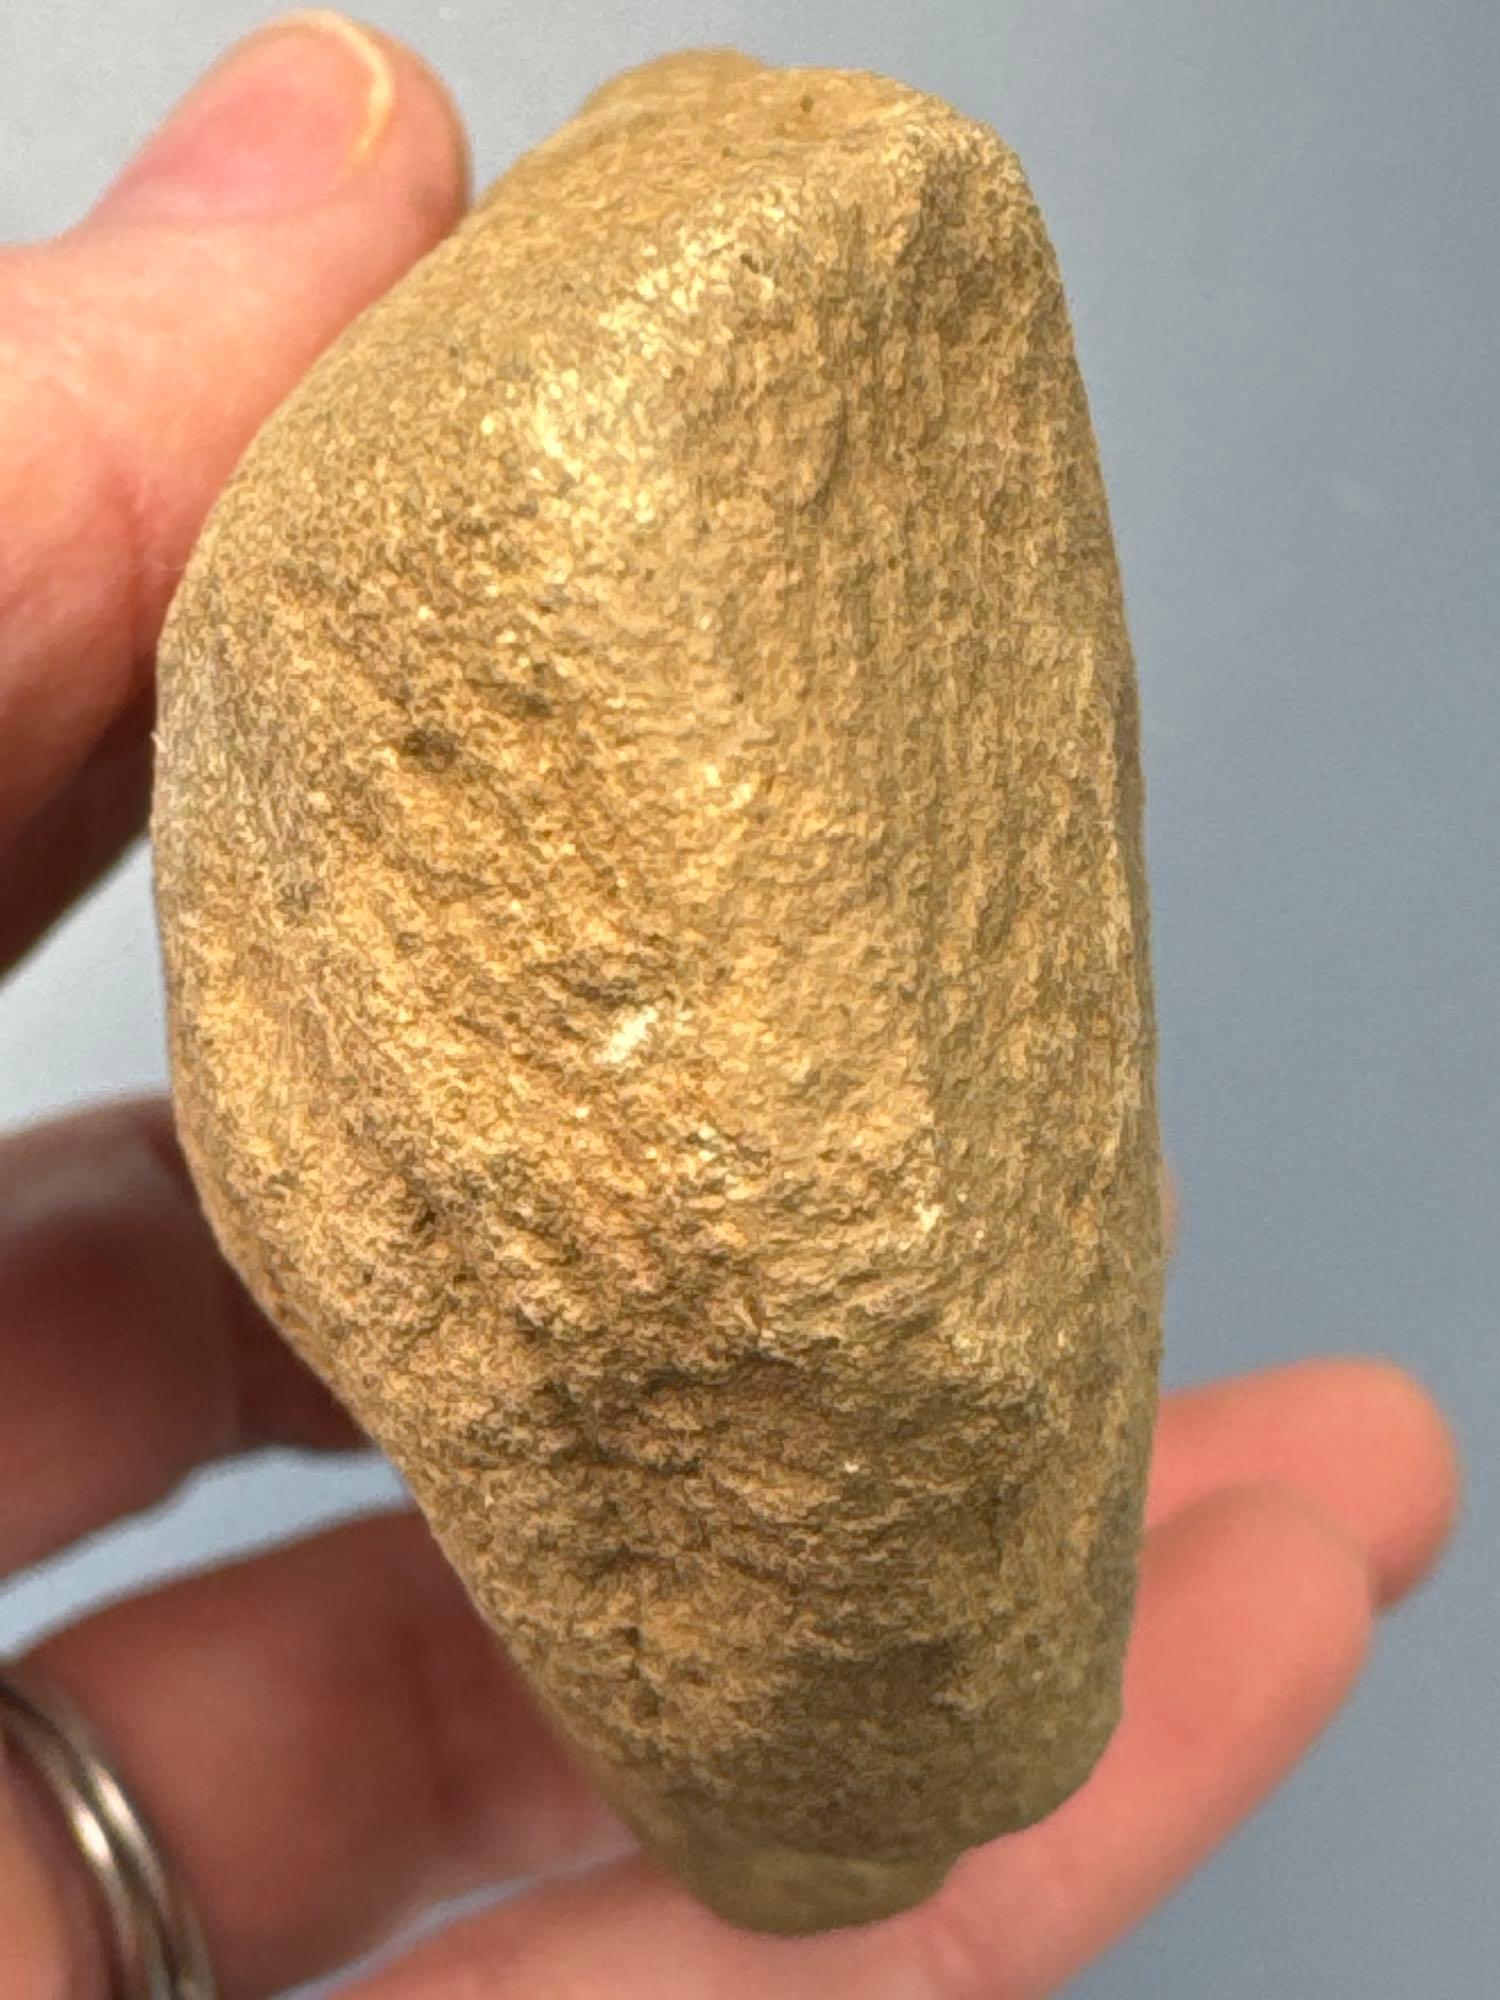 Rare 4 1/2" Knobbed Adze, Found by Lee Gibson on 3/20 in Columbus, Burlington Co., New Jersey